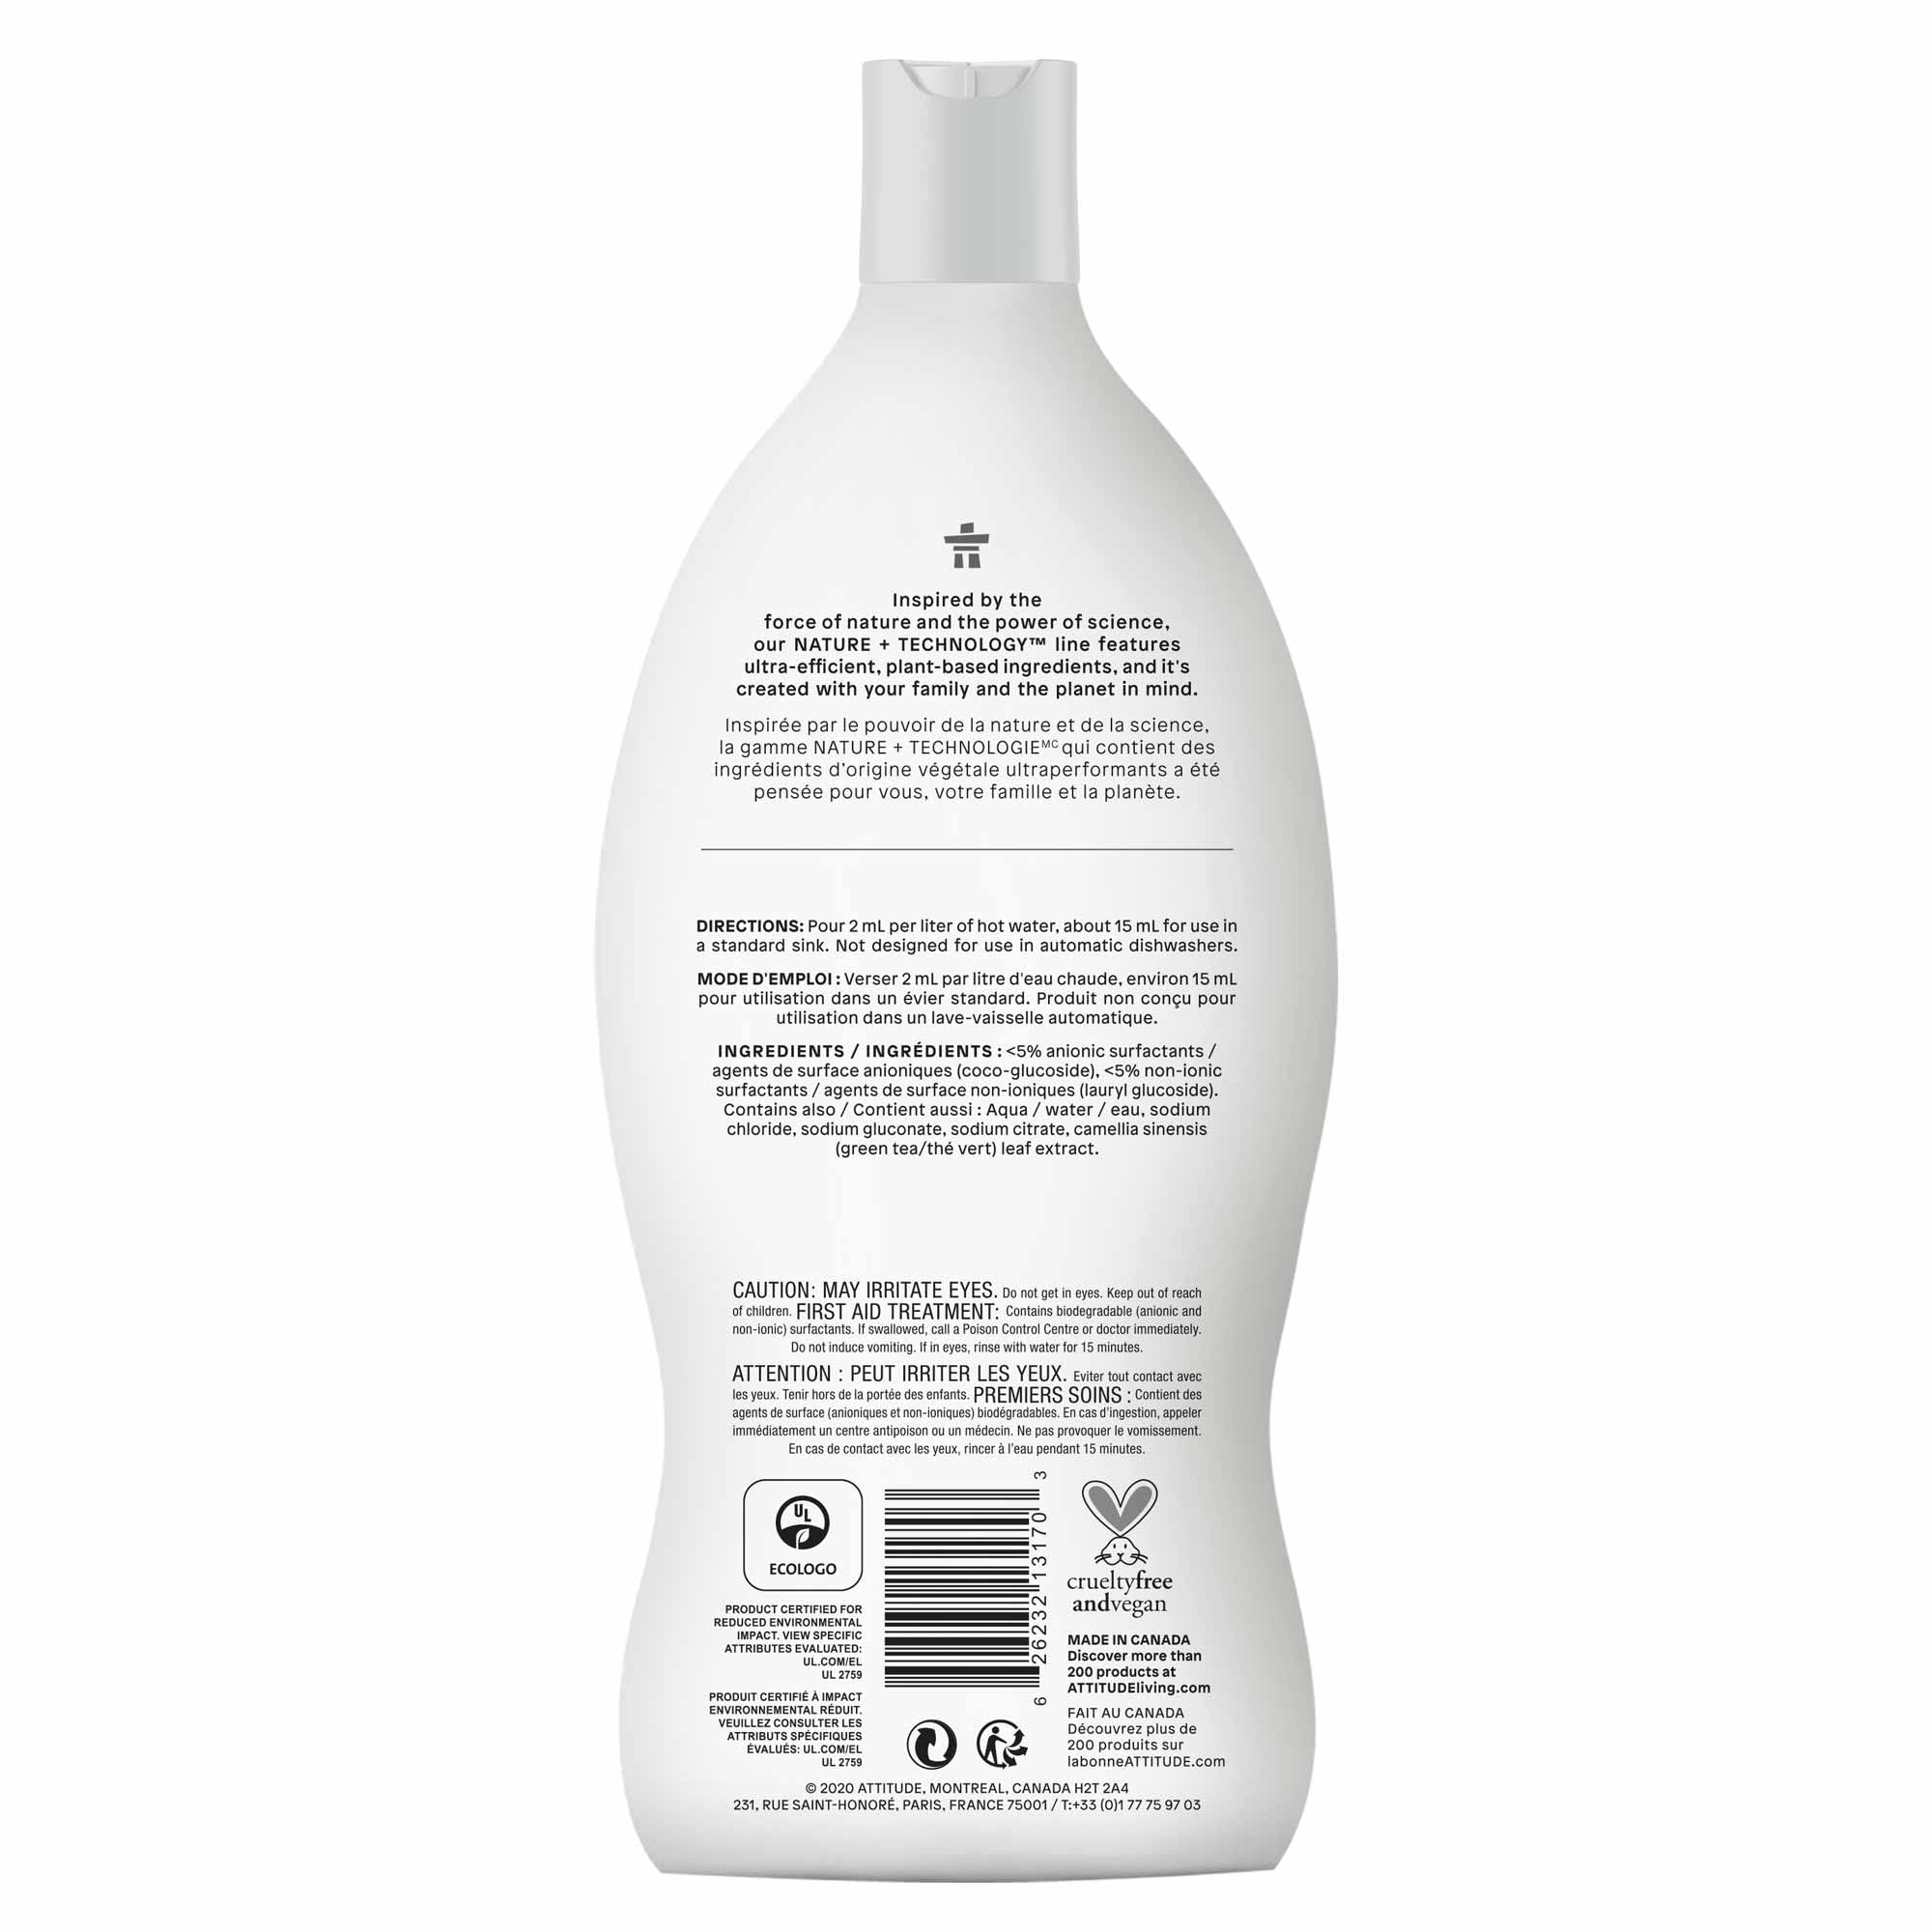 ATTITUDE Liquid Dish Detergent, Hypoallergenic Plant- and Mineral-Based Ingredients, Effective Dishwashing Soap Formula, Vegan and Cruelty-free, Unscented, 23.7 Fl Oz